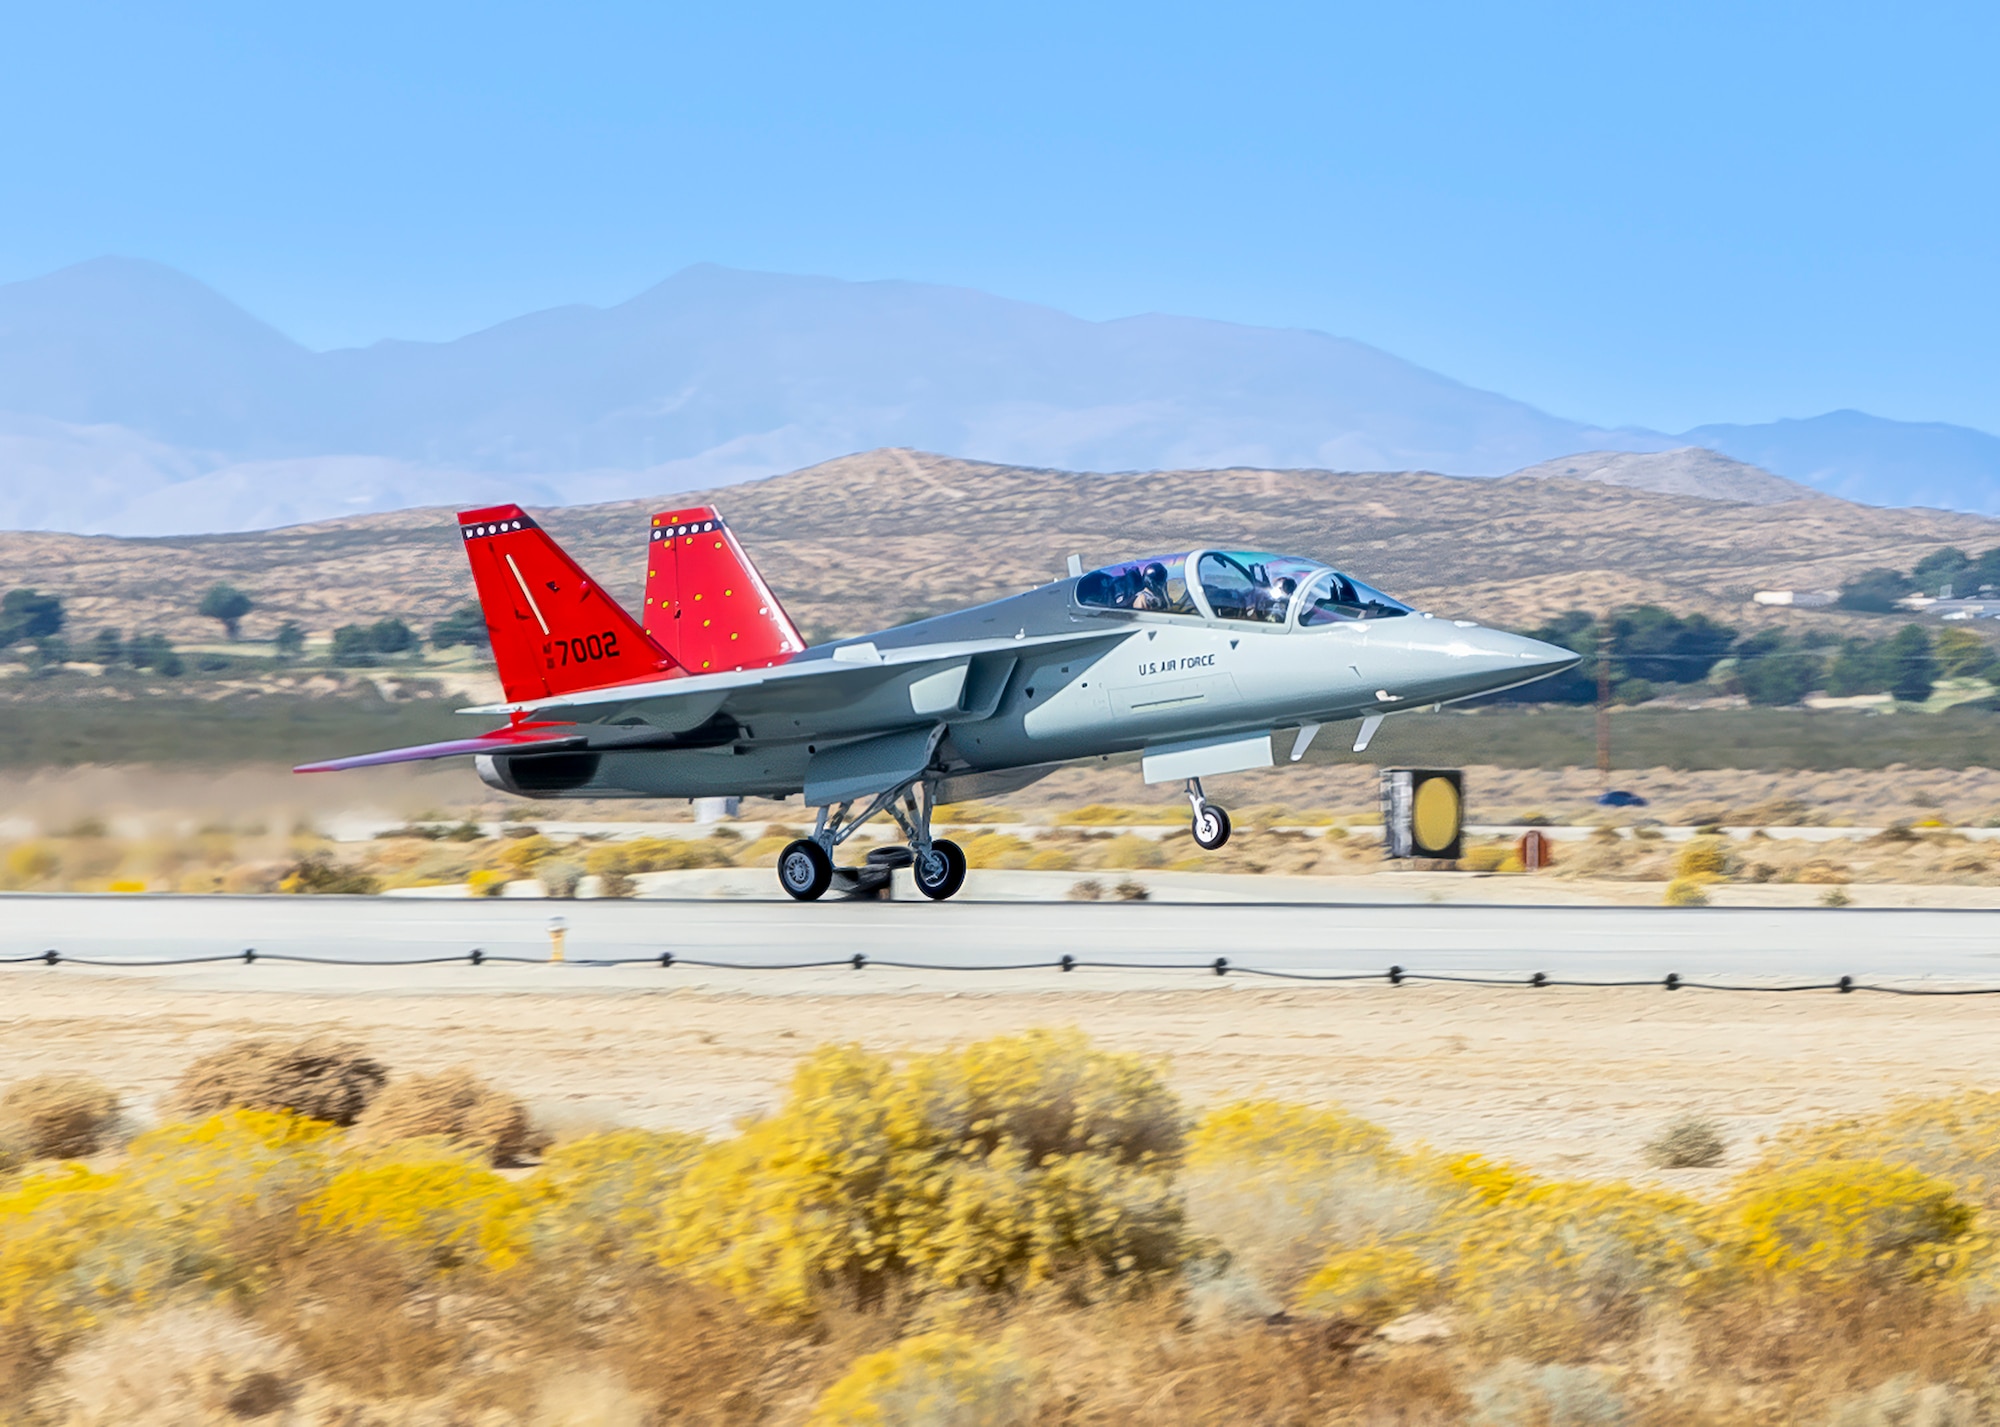 The first T-7A Red Hawk arrives at Edwards Air Force Base, California, Nov. 8. The aircraft’s test campaign is being executed by the T-7A Integrated Test Force, part of the Airpower Foundations Combined Test Force in association with the 416th Flight Test Squadron. The Integrated Test Force is a partnership between the USAF and T-7A manufacturer, The Boeing Company. (Air Force photo by Todd Schannuth)